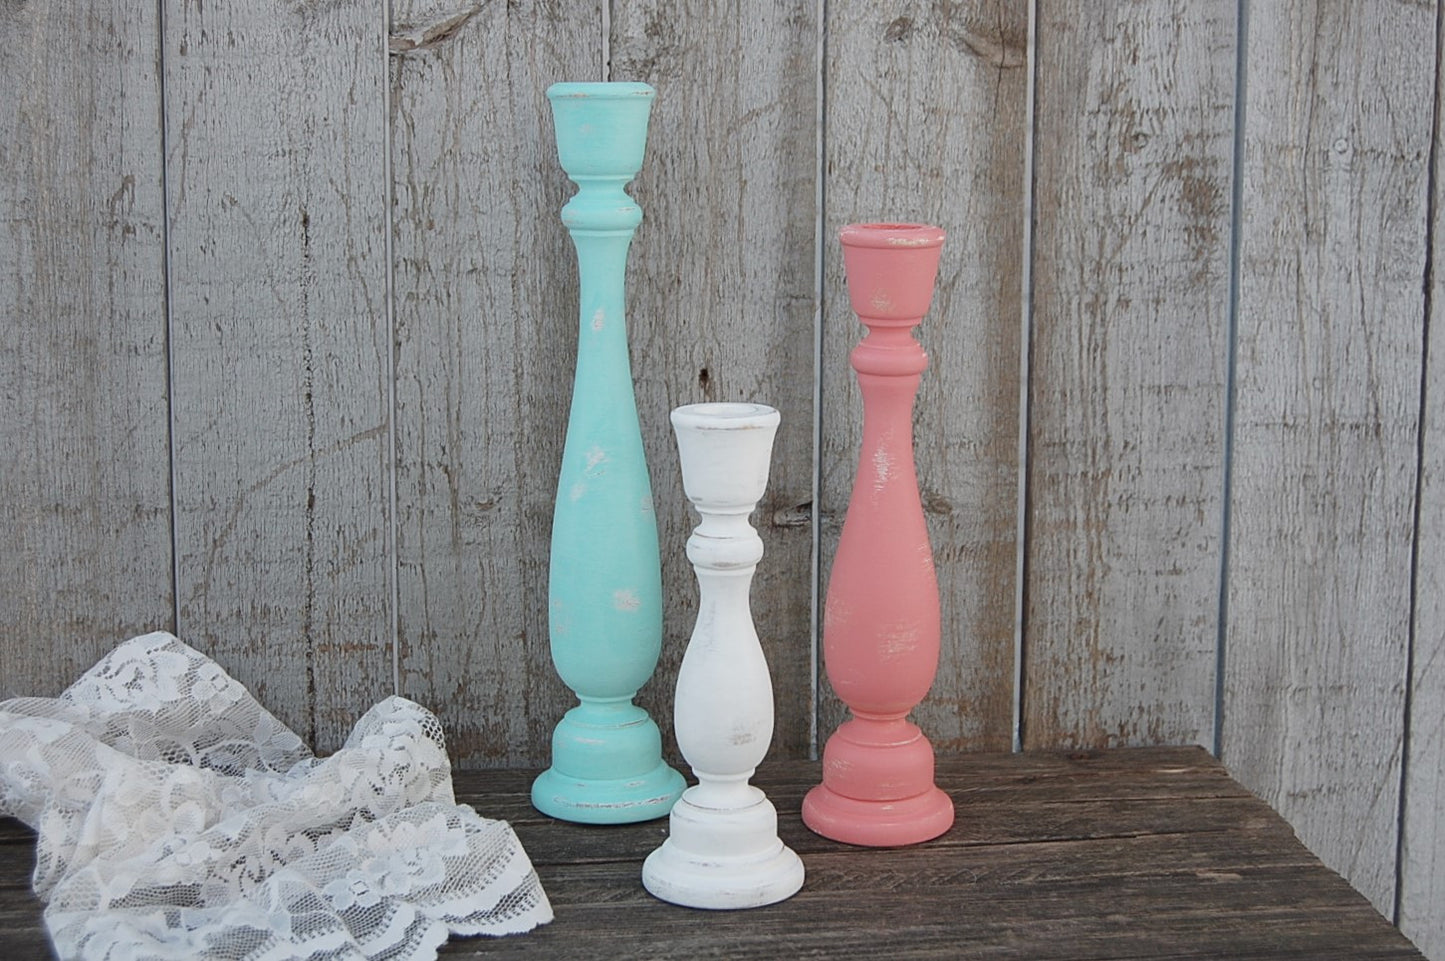 Mint & coral candlesticks - The Vintage Artistry